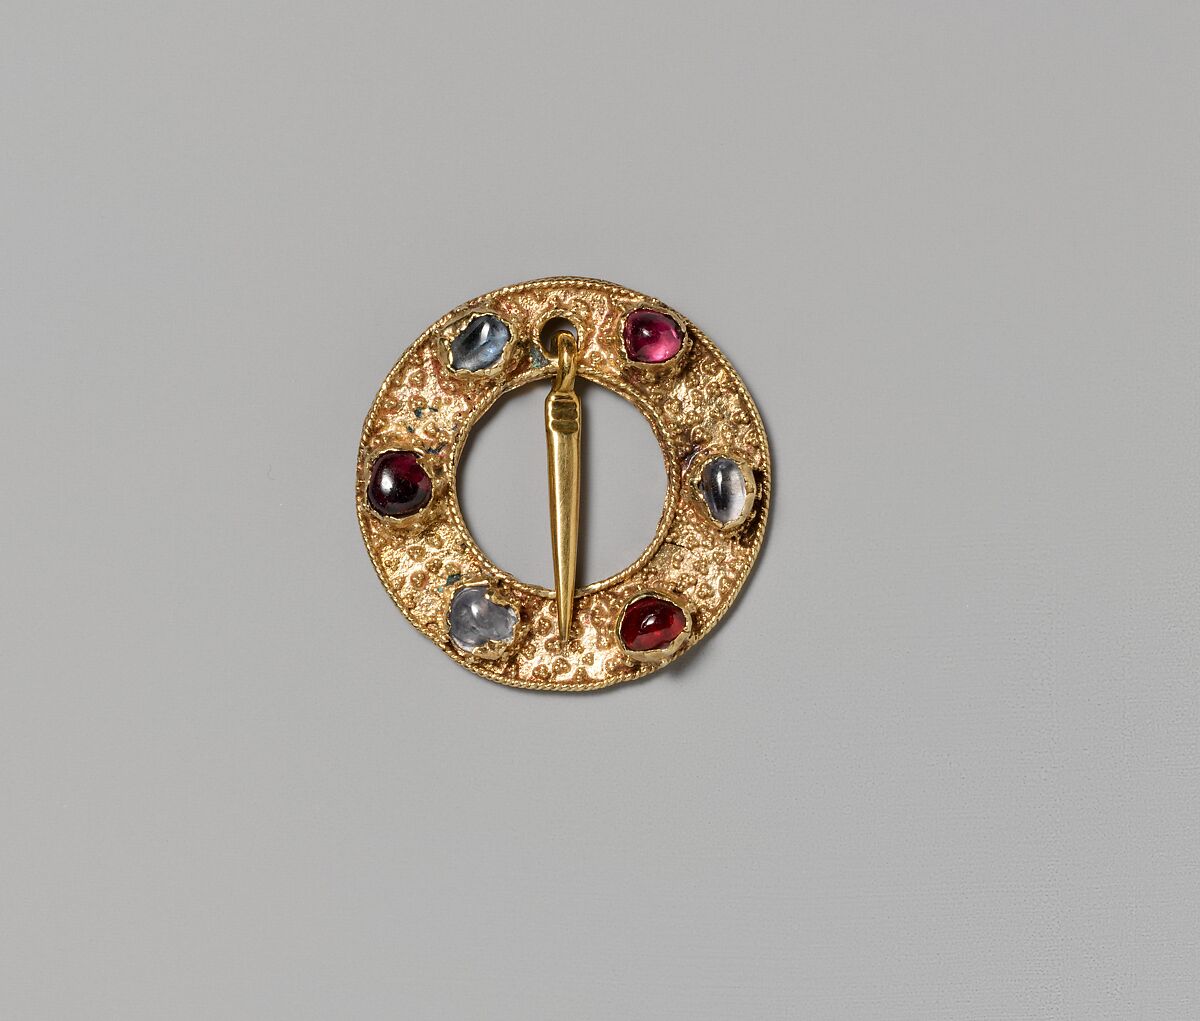 Ring Brooch, Gold, spinels, and sapphires, German 